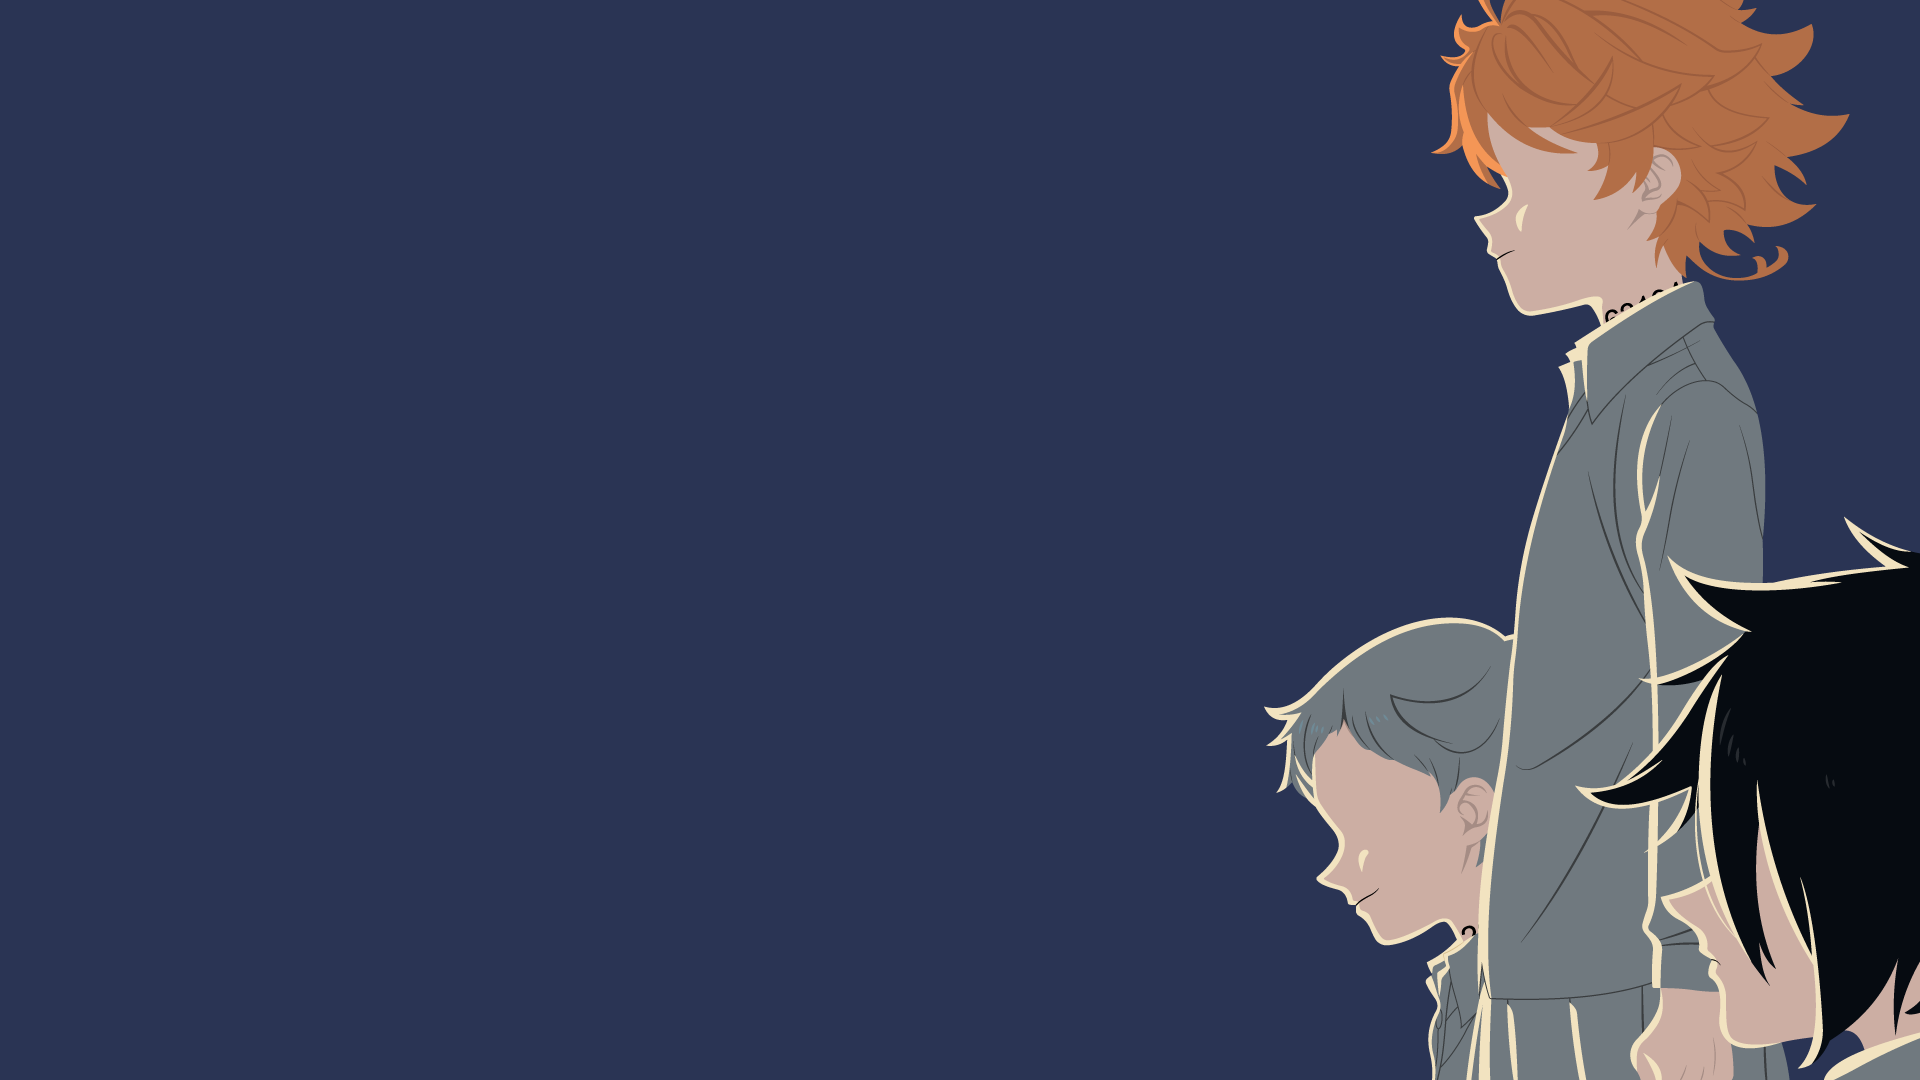 Emma The Promised Neverland Ray The Promised Neverland Norman The Promised Neverland 1920x1080